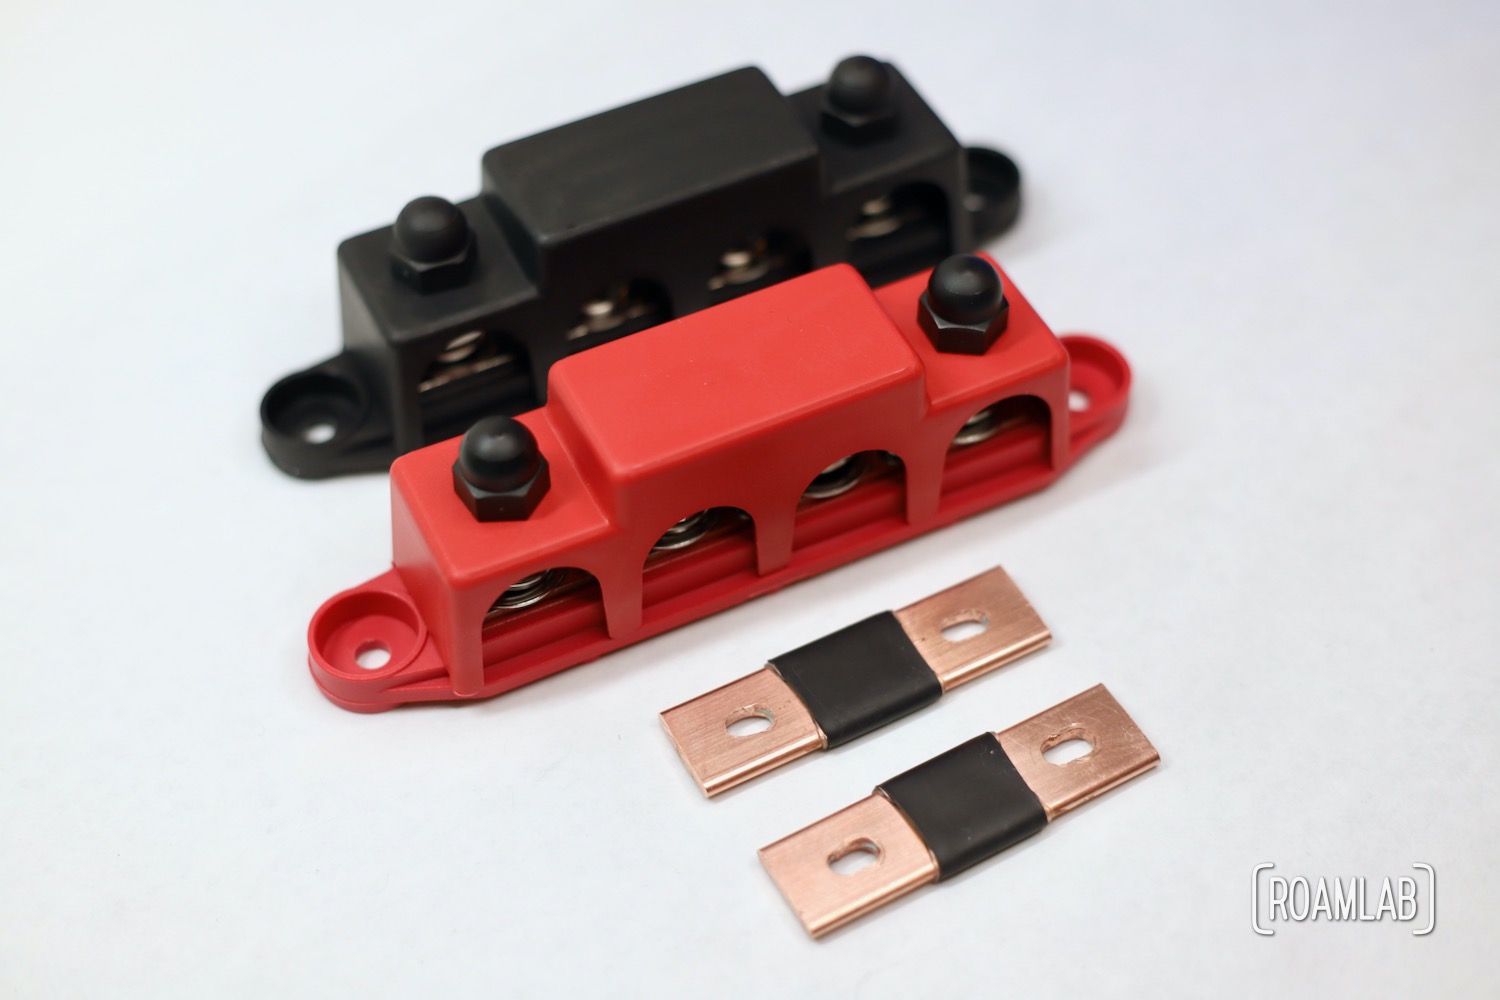 Bus bars (busbars) are short strips of conductive metal for high current electric connections. Learn how to build DIY bars for lithium battery cells.